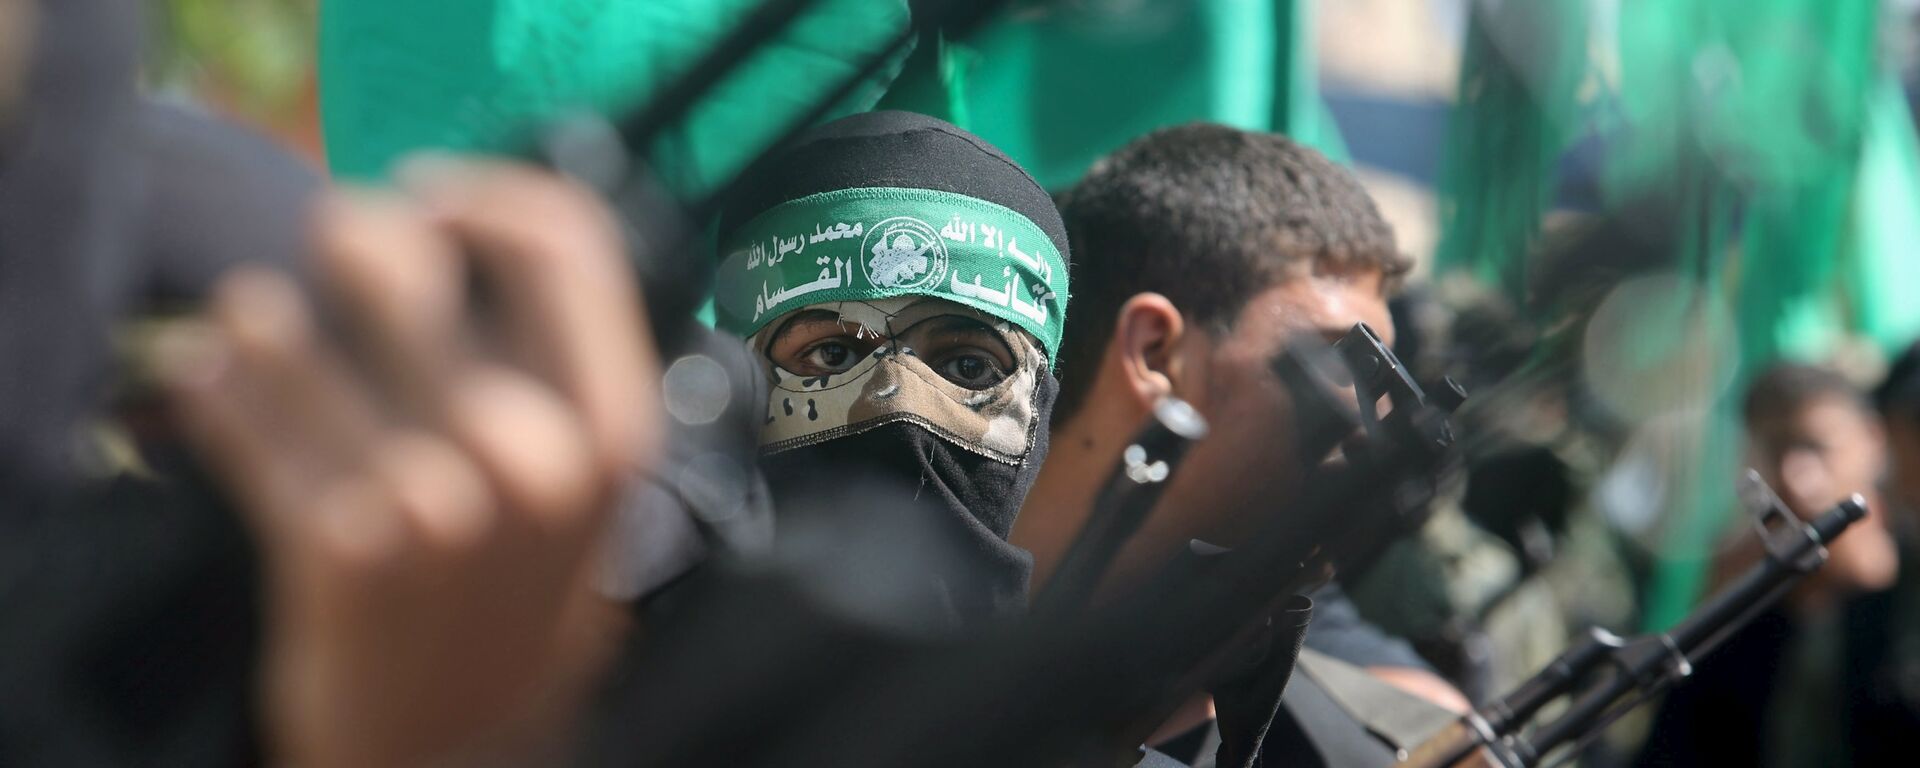 Palestinian Hamas militants take part in a protest against the Israeli police raid on Jerusalem's al-Aqsa mosque on Tuesday, in Khan Younis in the southern Gaza Strip, September 18, 2015. - Sputnik Mundo, 1920, 18.05.2021